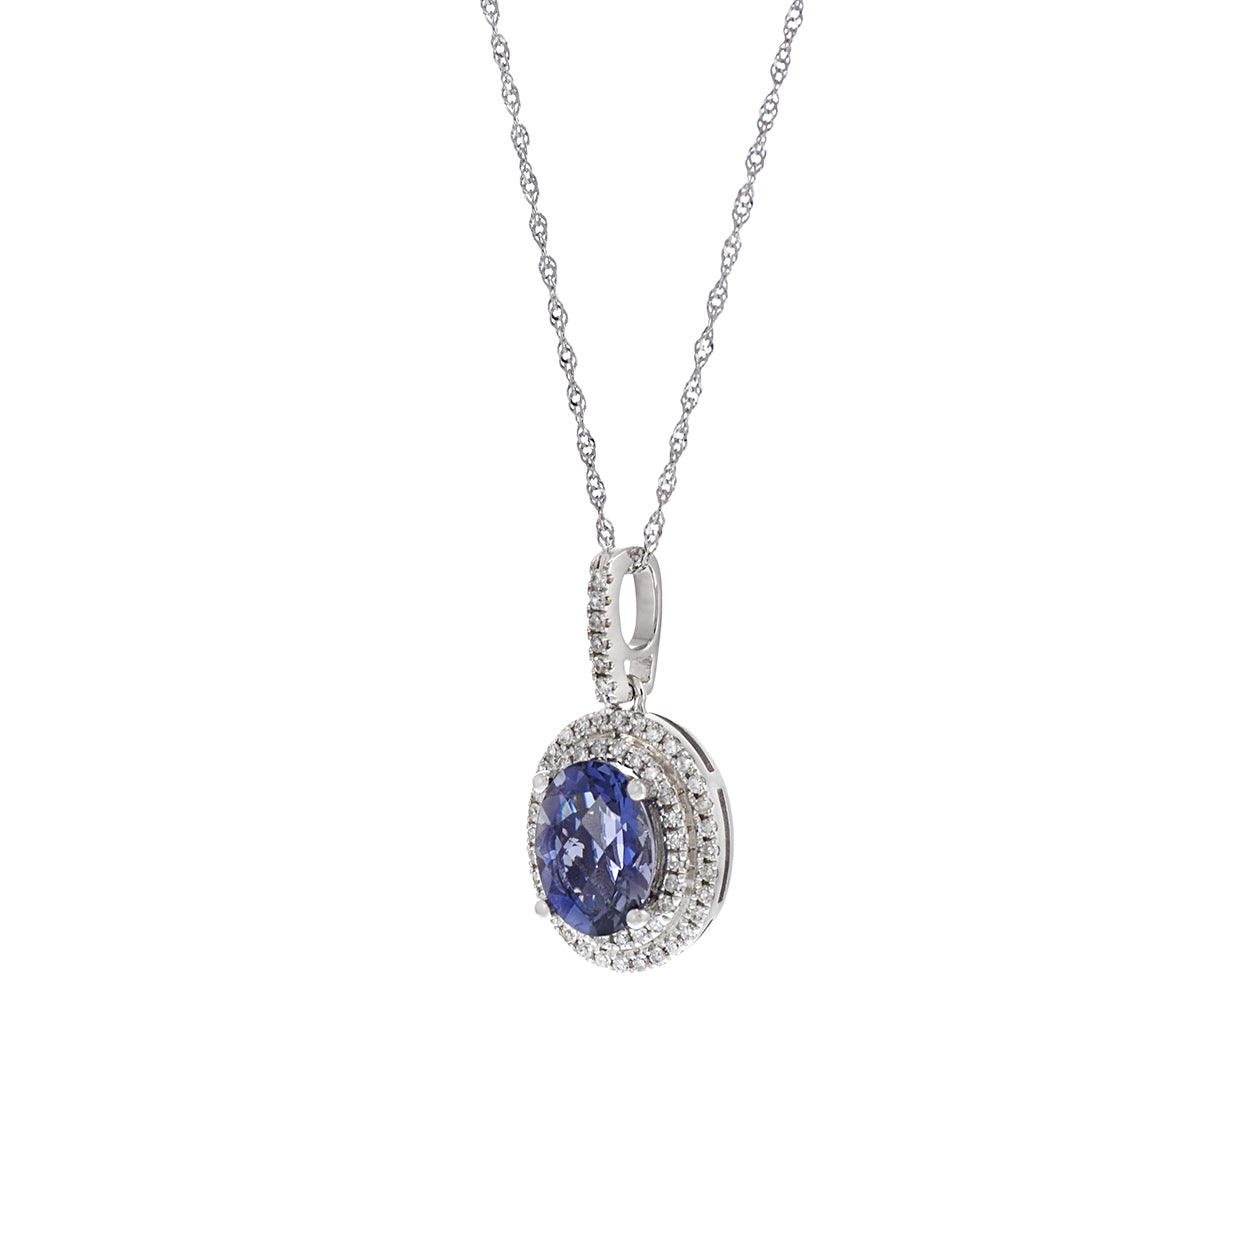 14KT White Gold Iolite and Diamond Necklace